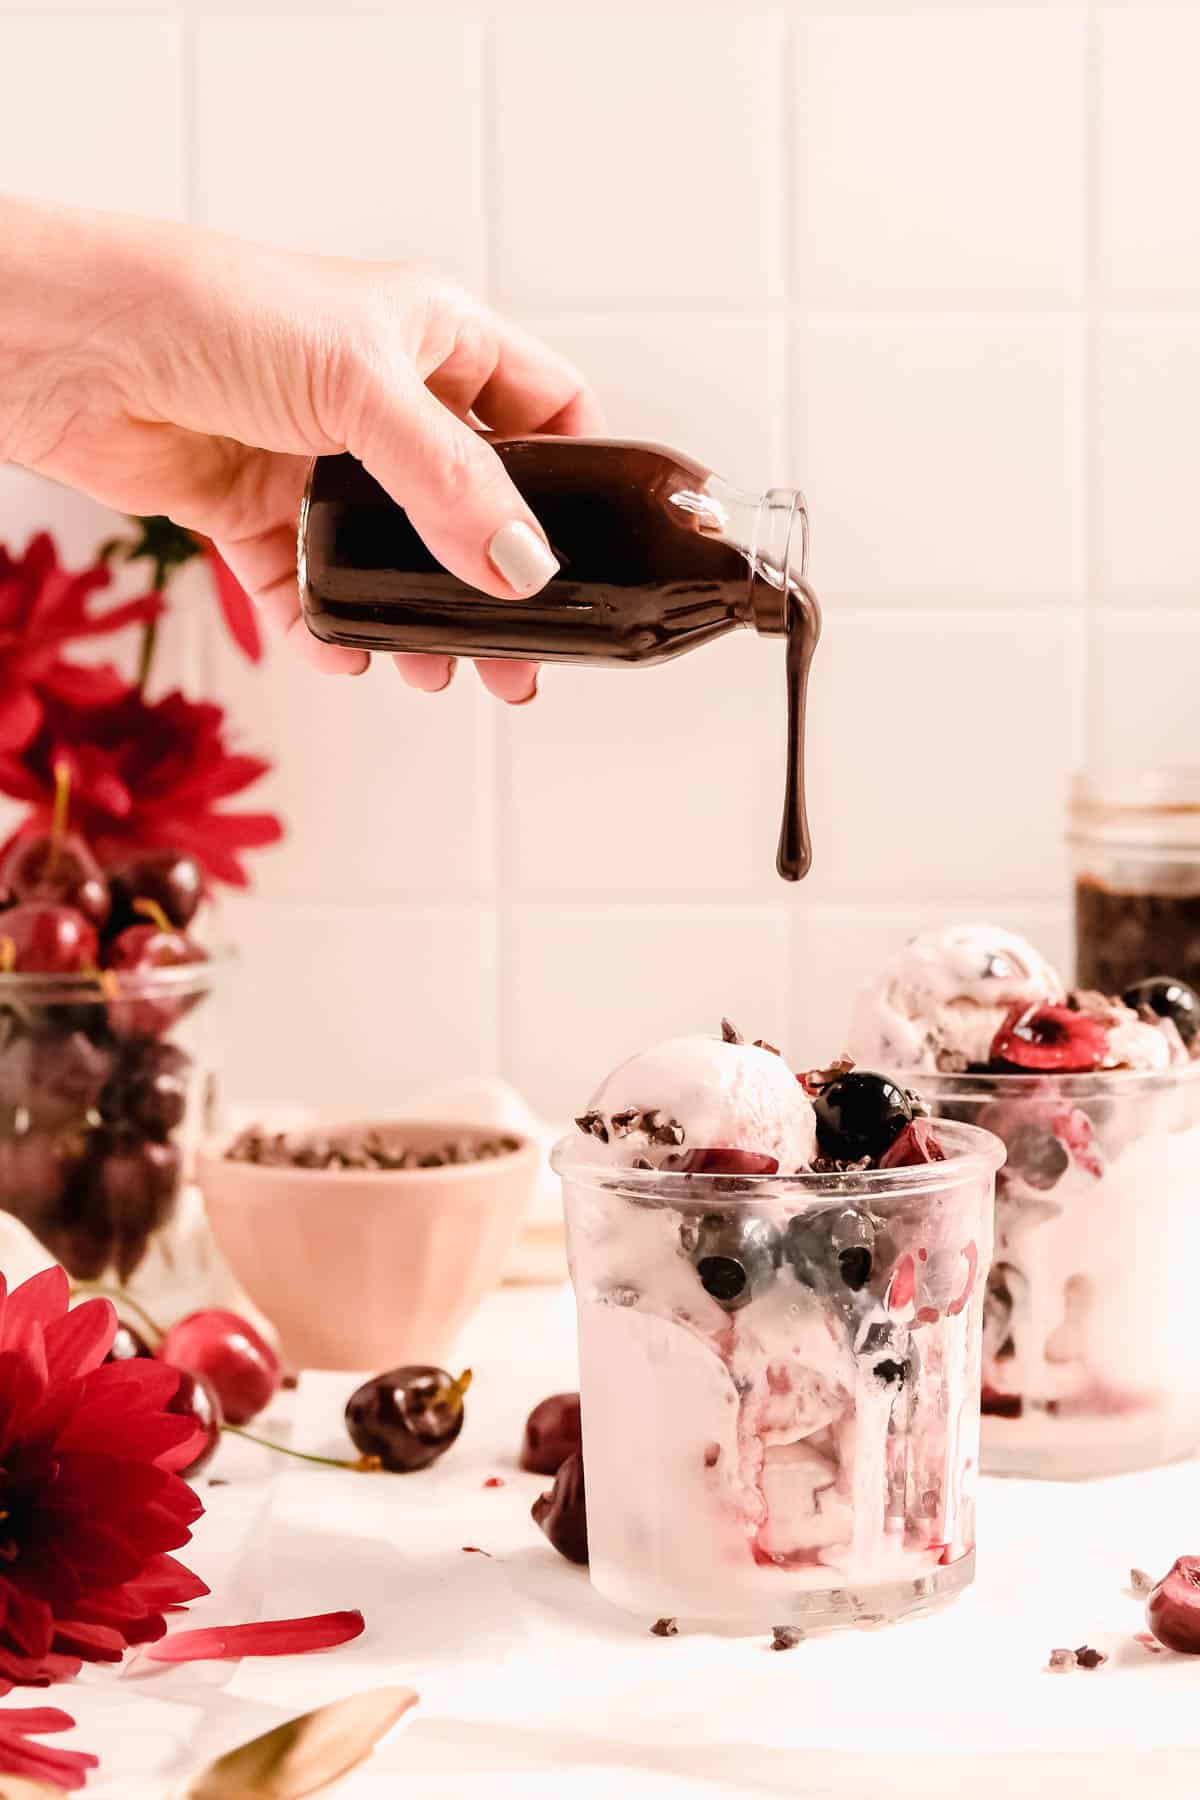 homemade hot fudge mid-pour from a bottle onto a cherry ice cream sundae.